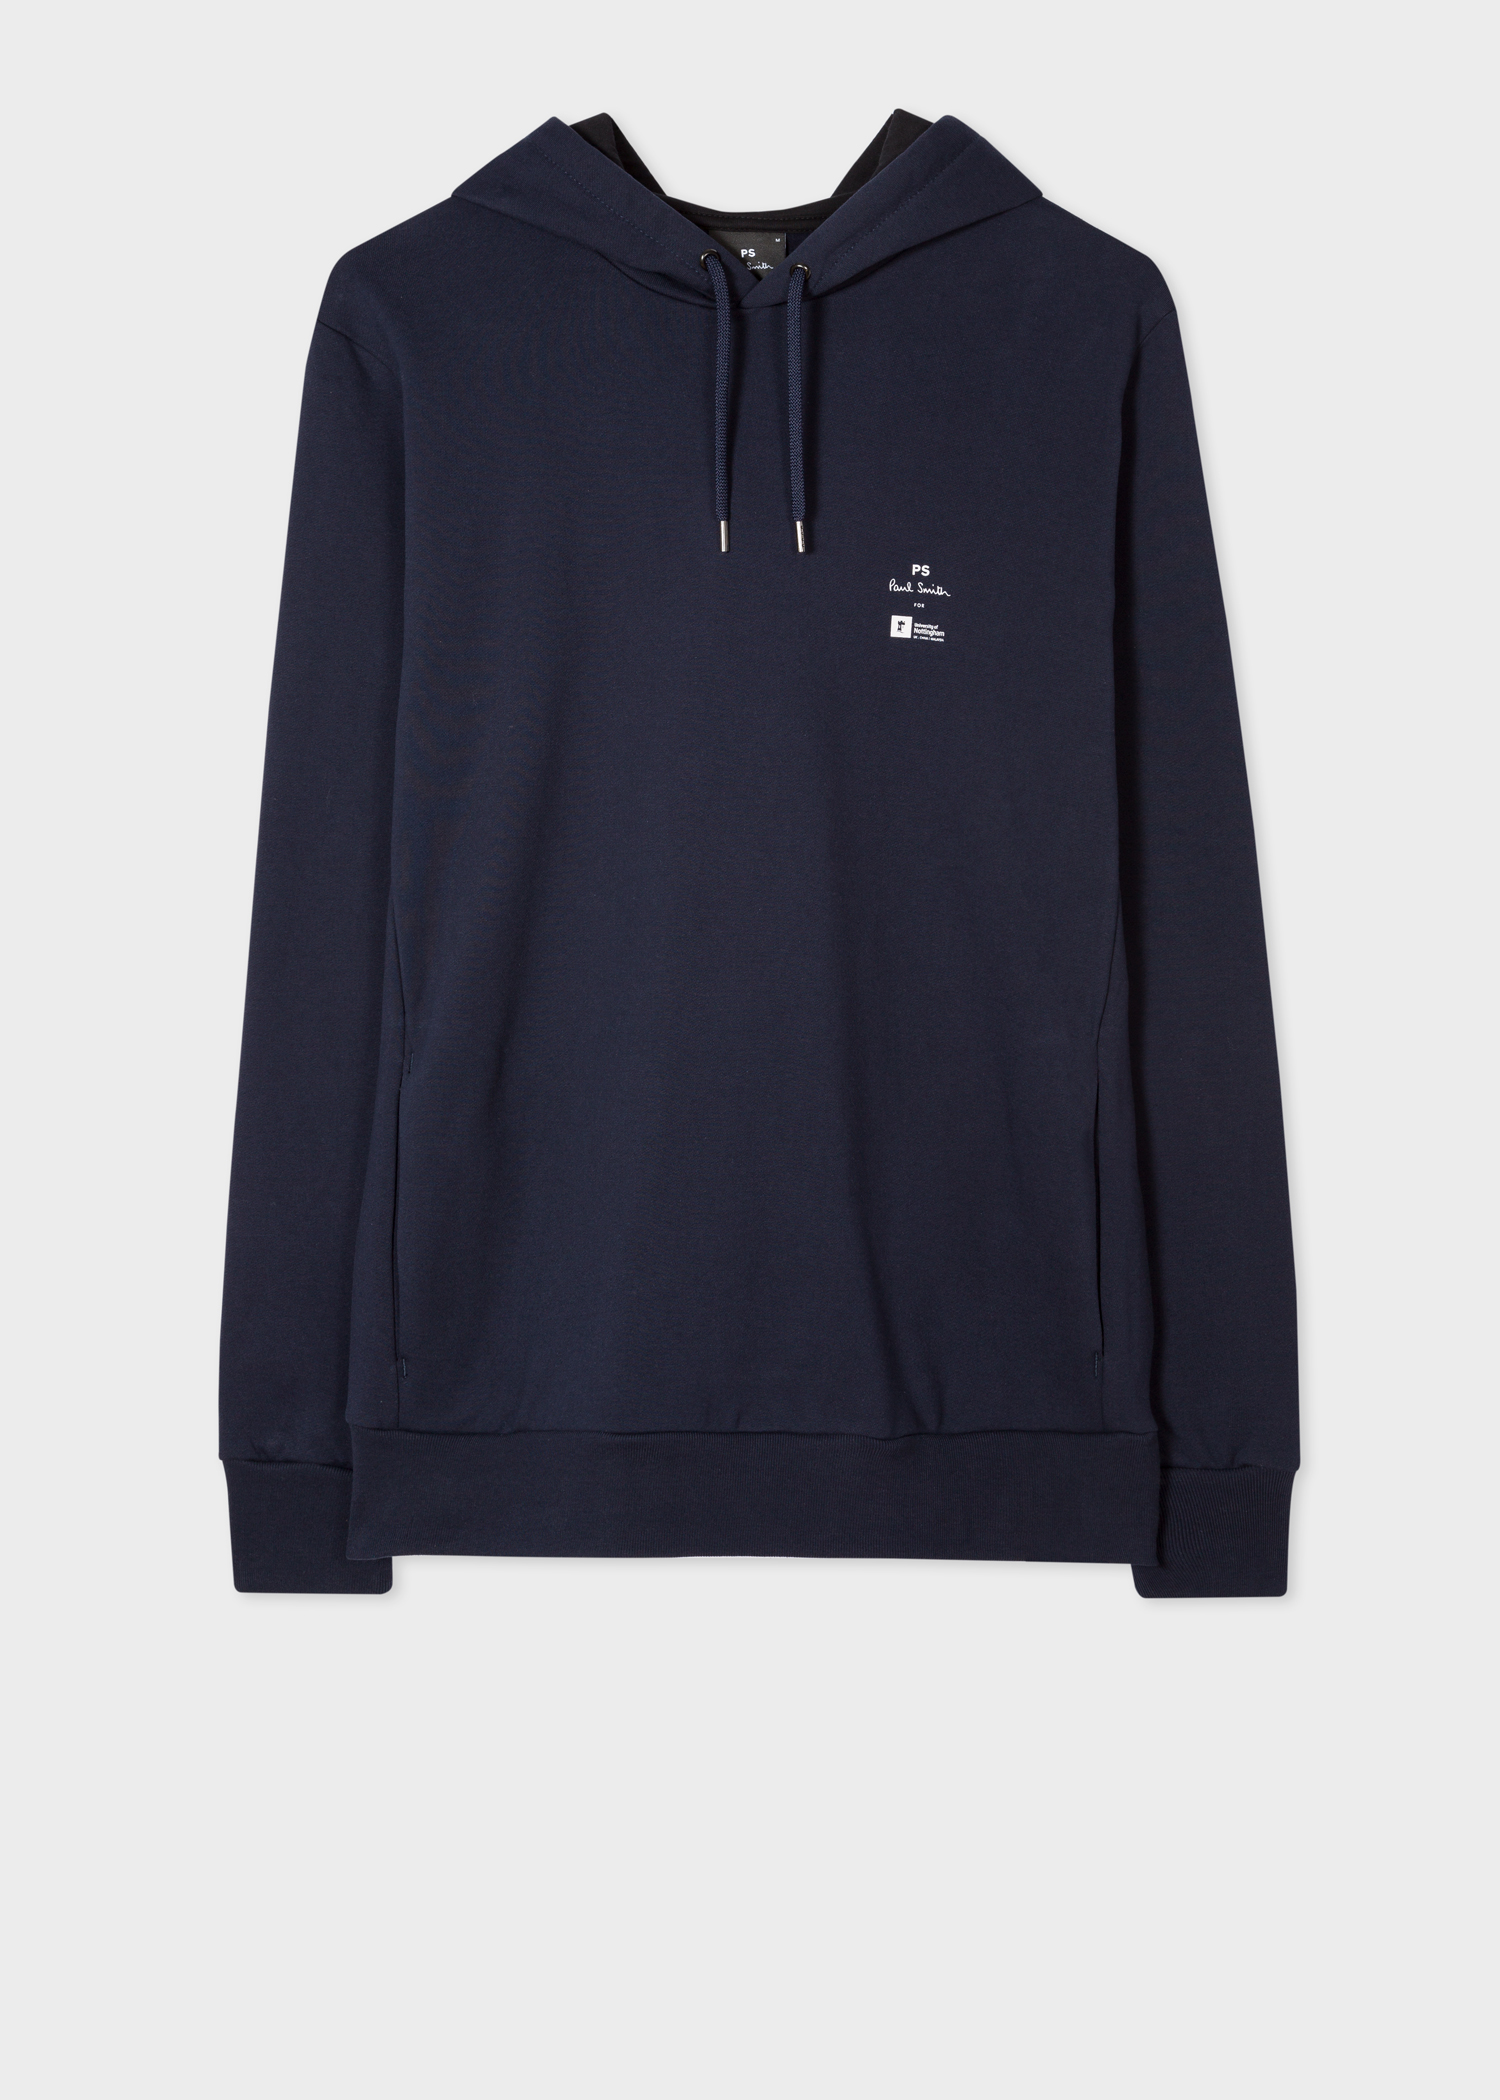 Front view - Paul Smith For University Of Nottingham - Navy 'Trent Building' Print Hoodie Paul Smith